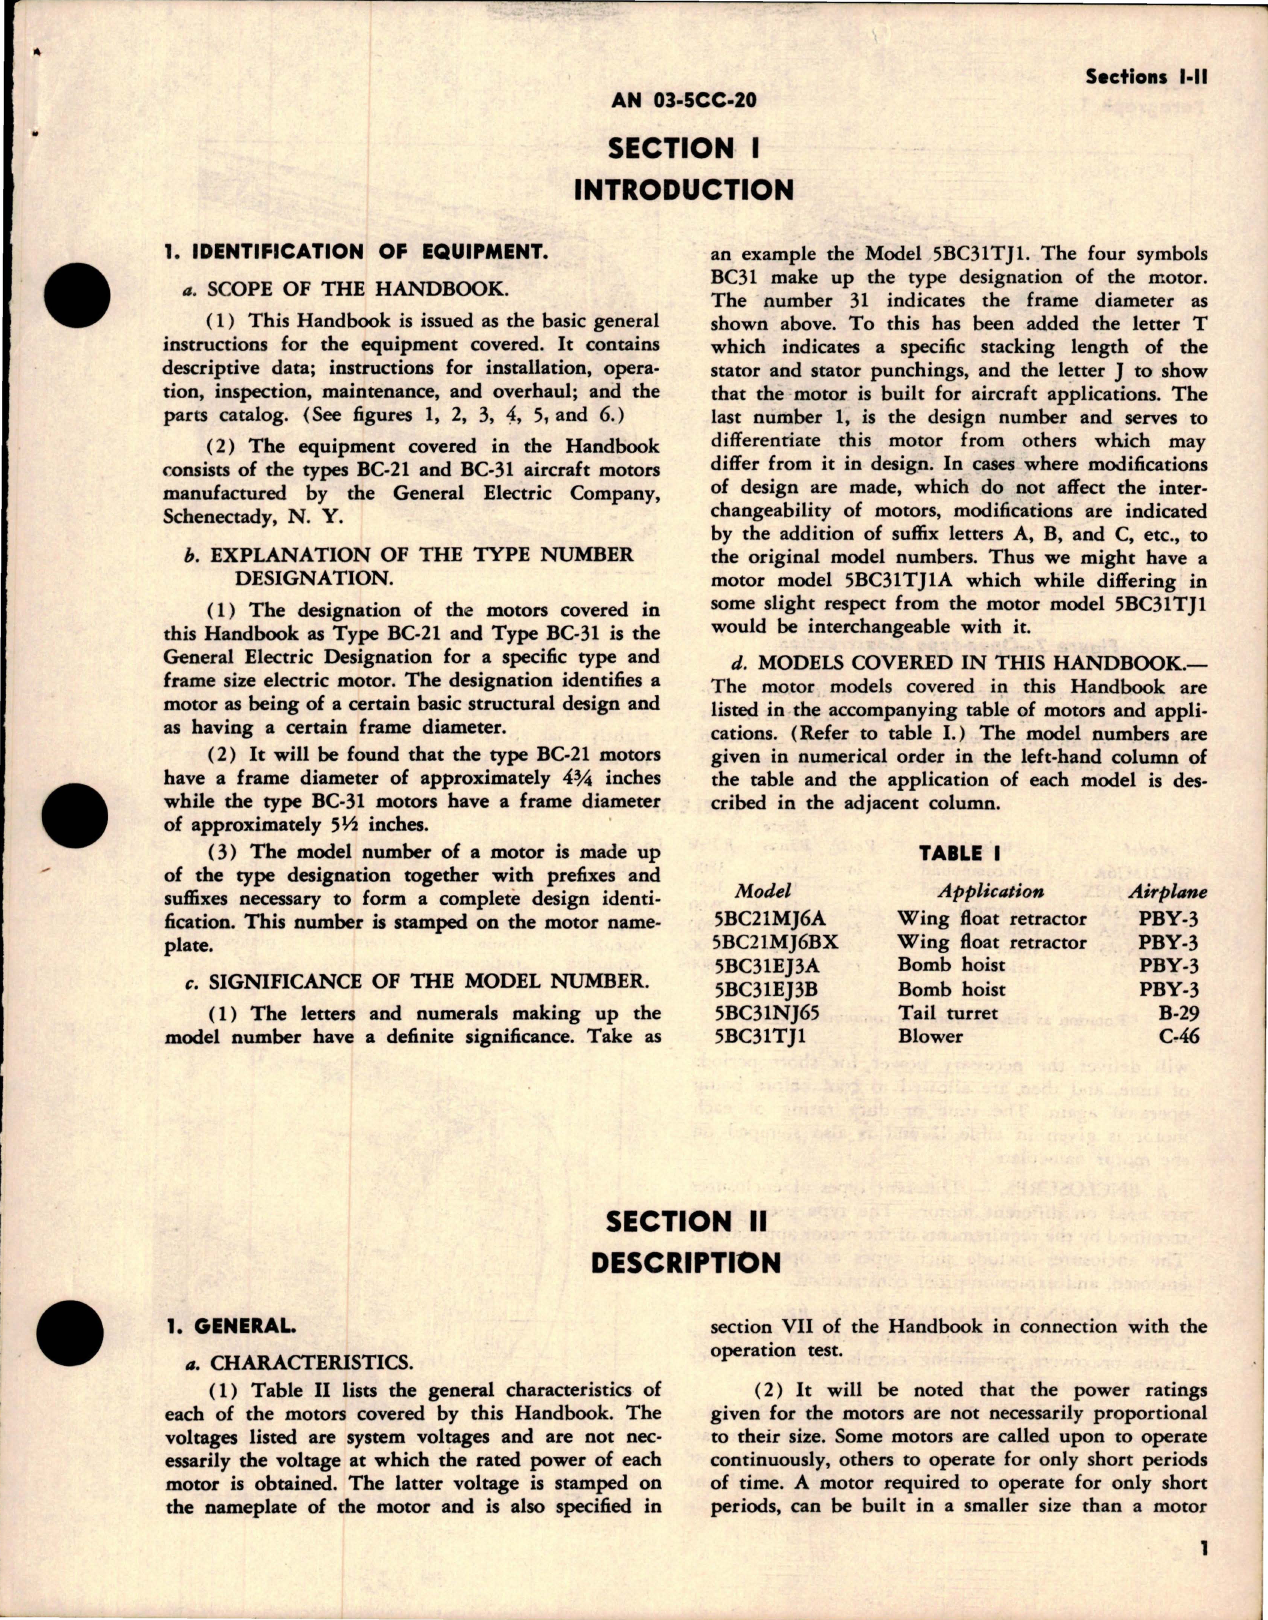 Sample page 5 from AirCorps Library document: Parts Catalog for Aircraft Motors - Models 5BC21 and 5BC31 Series